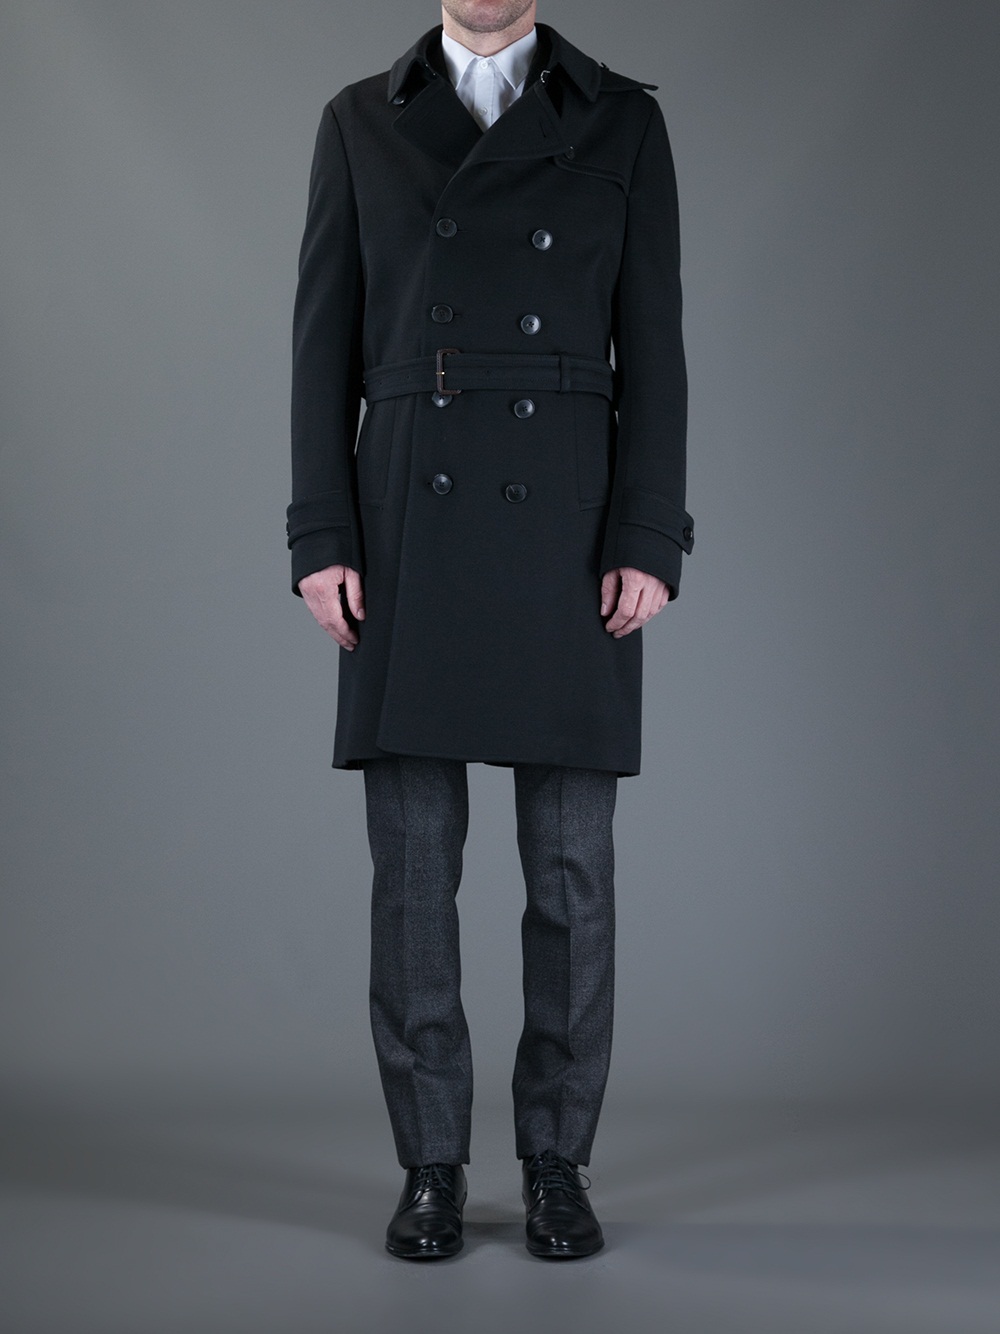 Gucci Long Trench Coat in Black for Men - Lyst